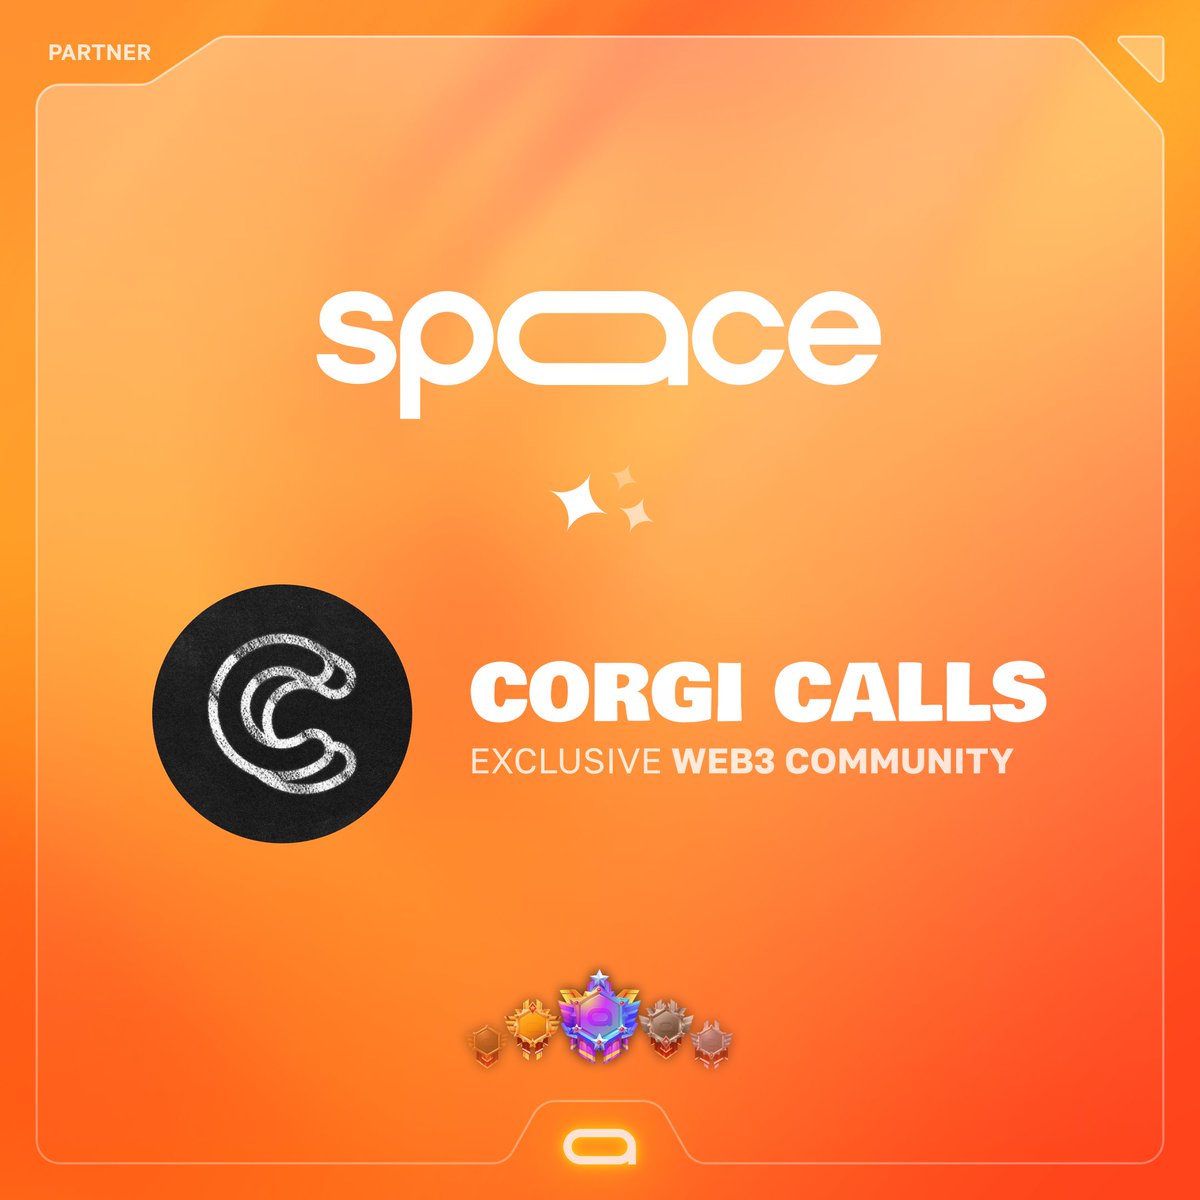 Building for traders 🤝 building with traders Spaace is thrilled to announce its fundraising partnership with @CorgiCalls, a vibrant web3 community offering leading-edge alpha and educational content. Exciting times lie ahead as we join forces with Corgi Calls members to